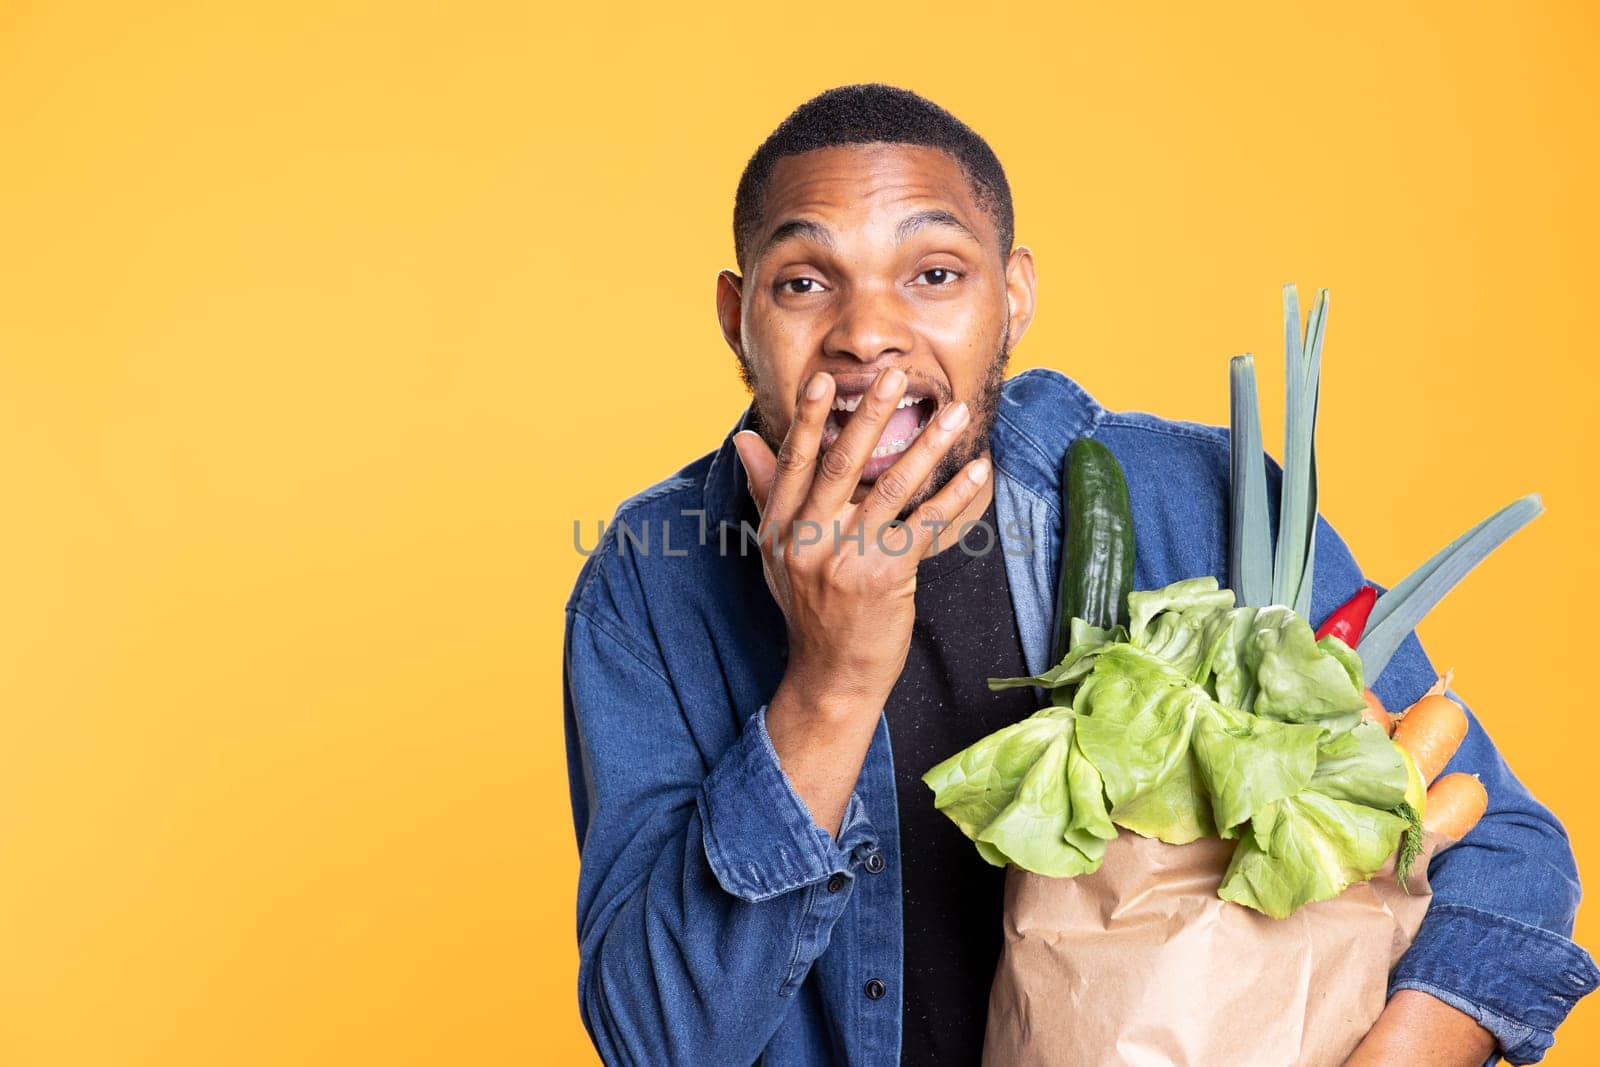 Joyful positive model feeling satisfied with fresh groceries in a paper bag, supporting vegan nutrition and ethically sourced food. Optimistic bio enthusiast enjoys natural organic veggies.